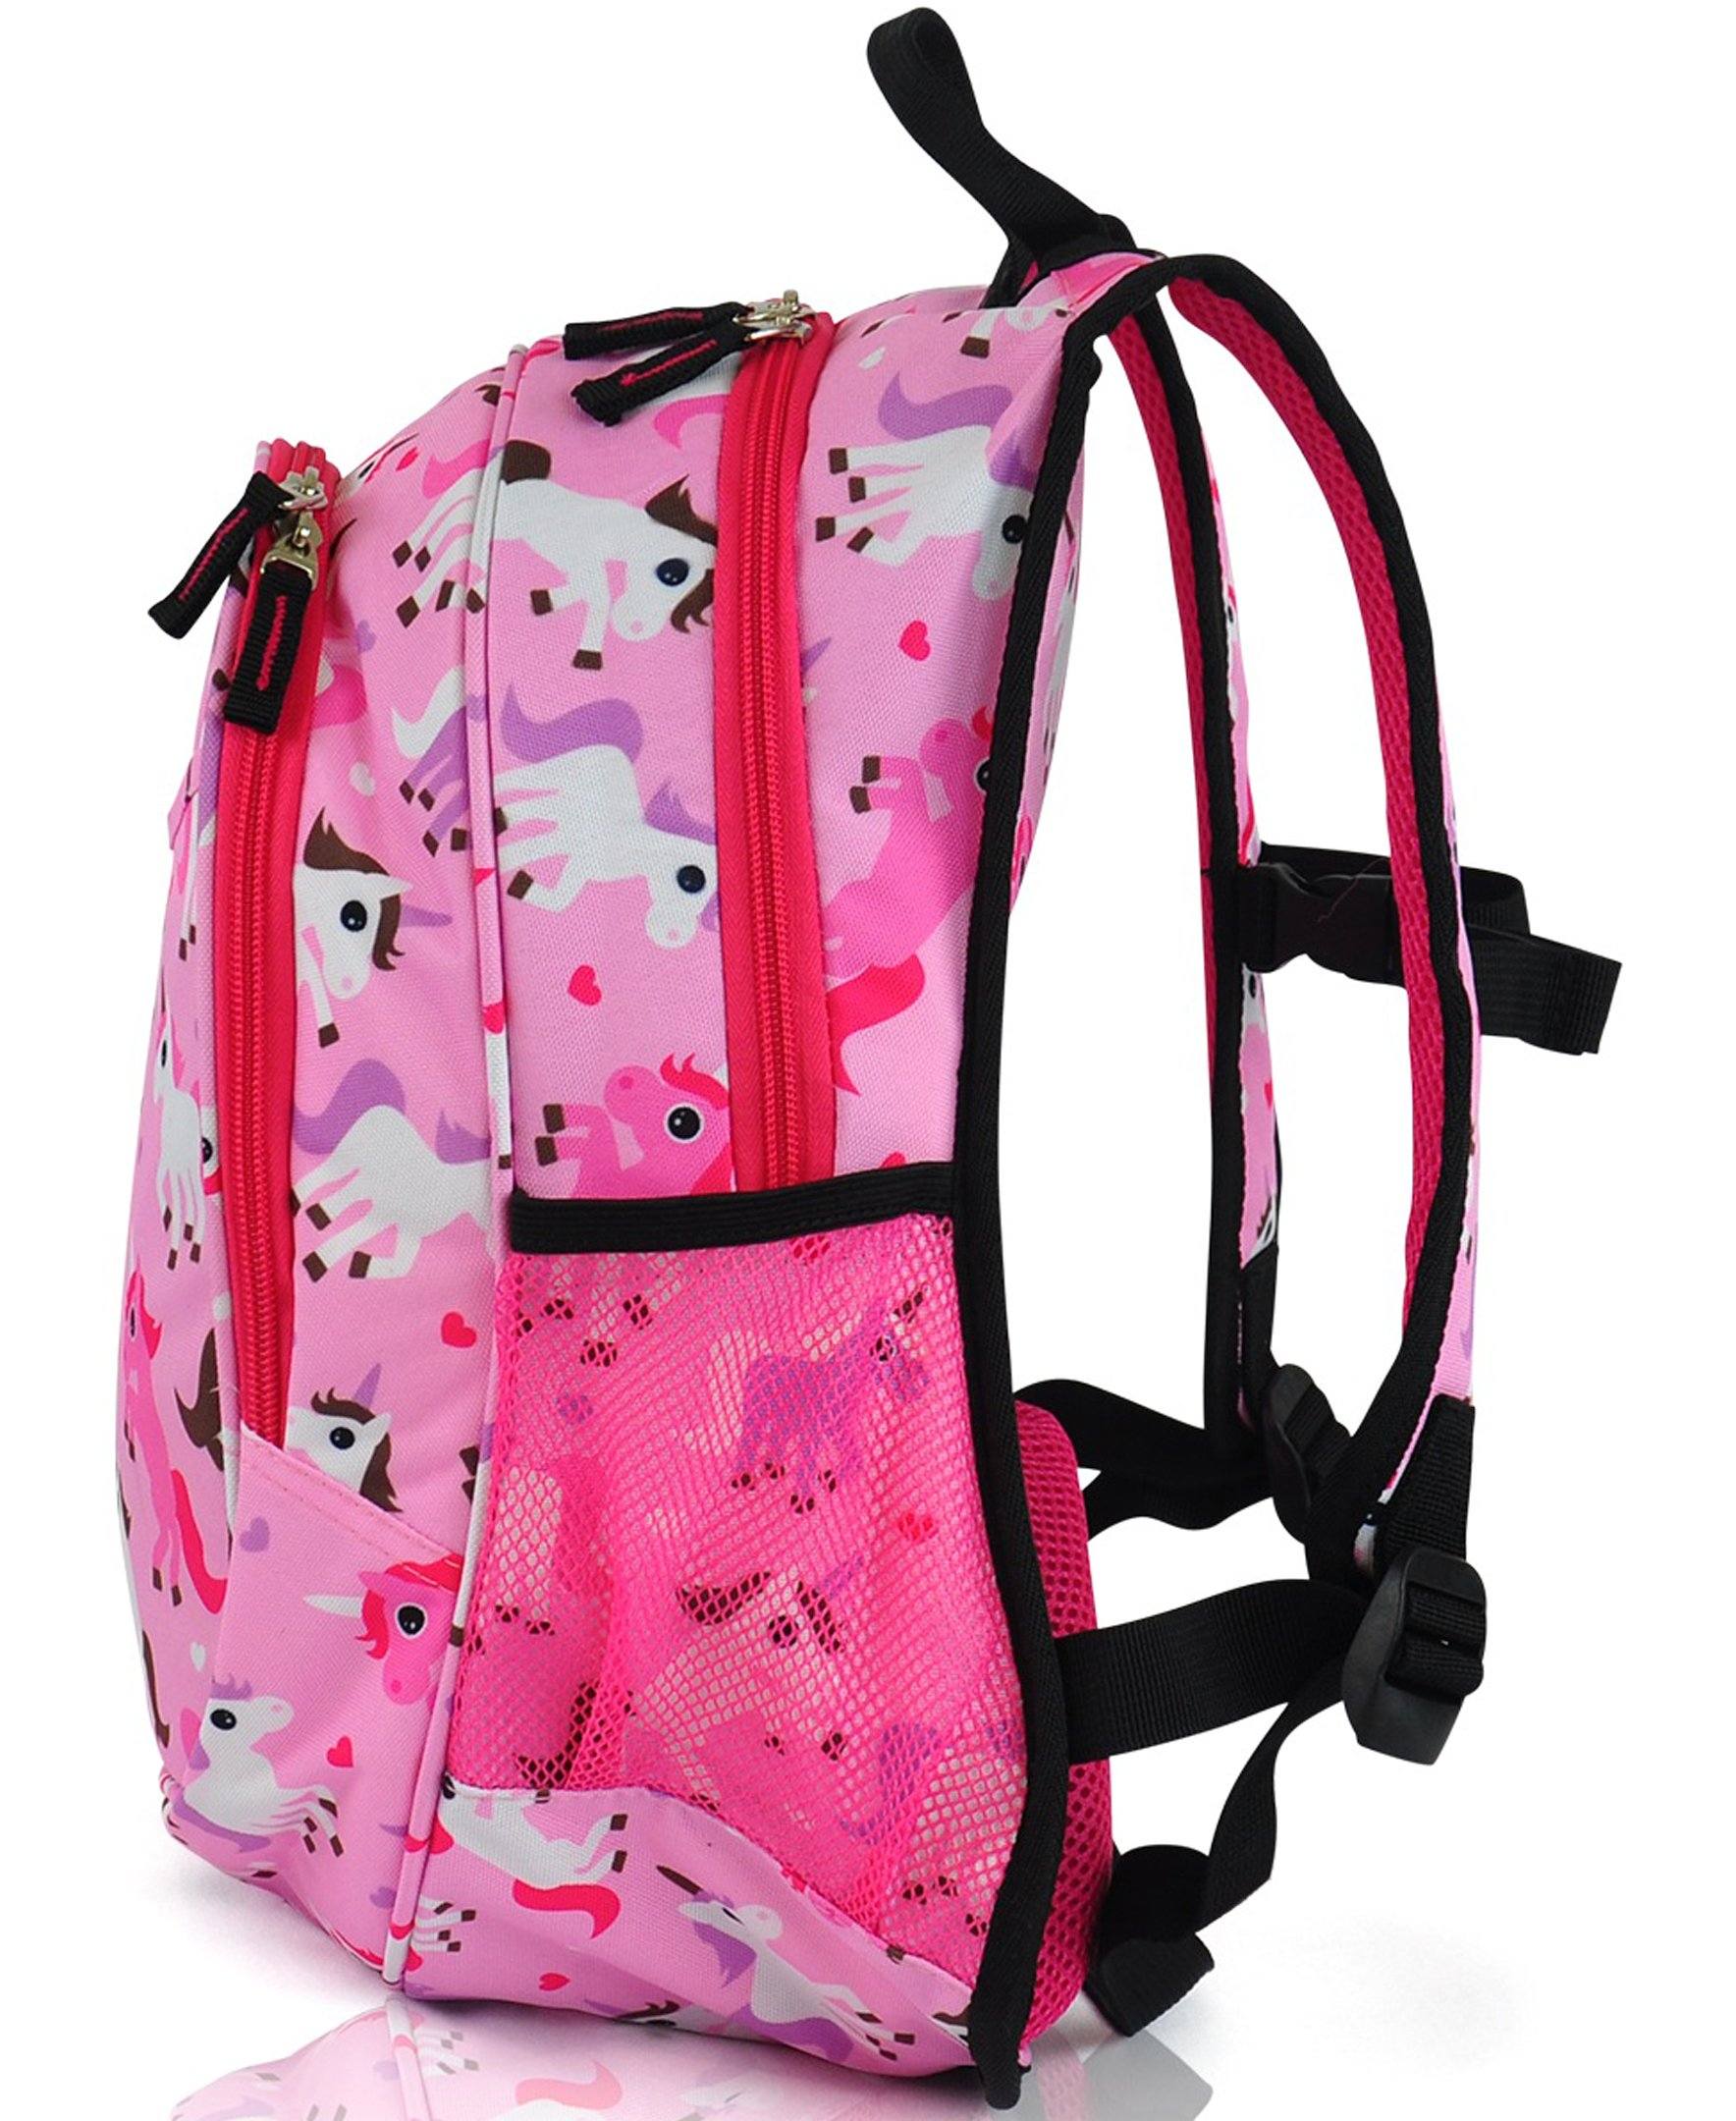 O3KCBP020 Obersee Mini Preschool All-in-One Backpack for Toddlers and Kids with integrated Insulated Cooler | Unicorn - image 4 of 5